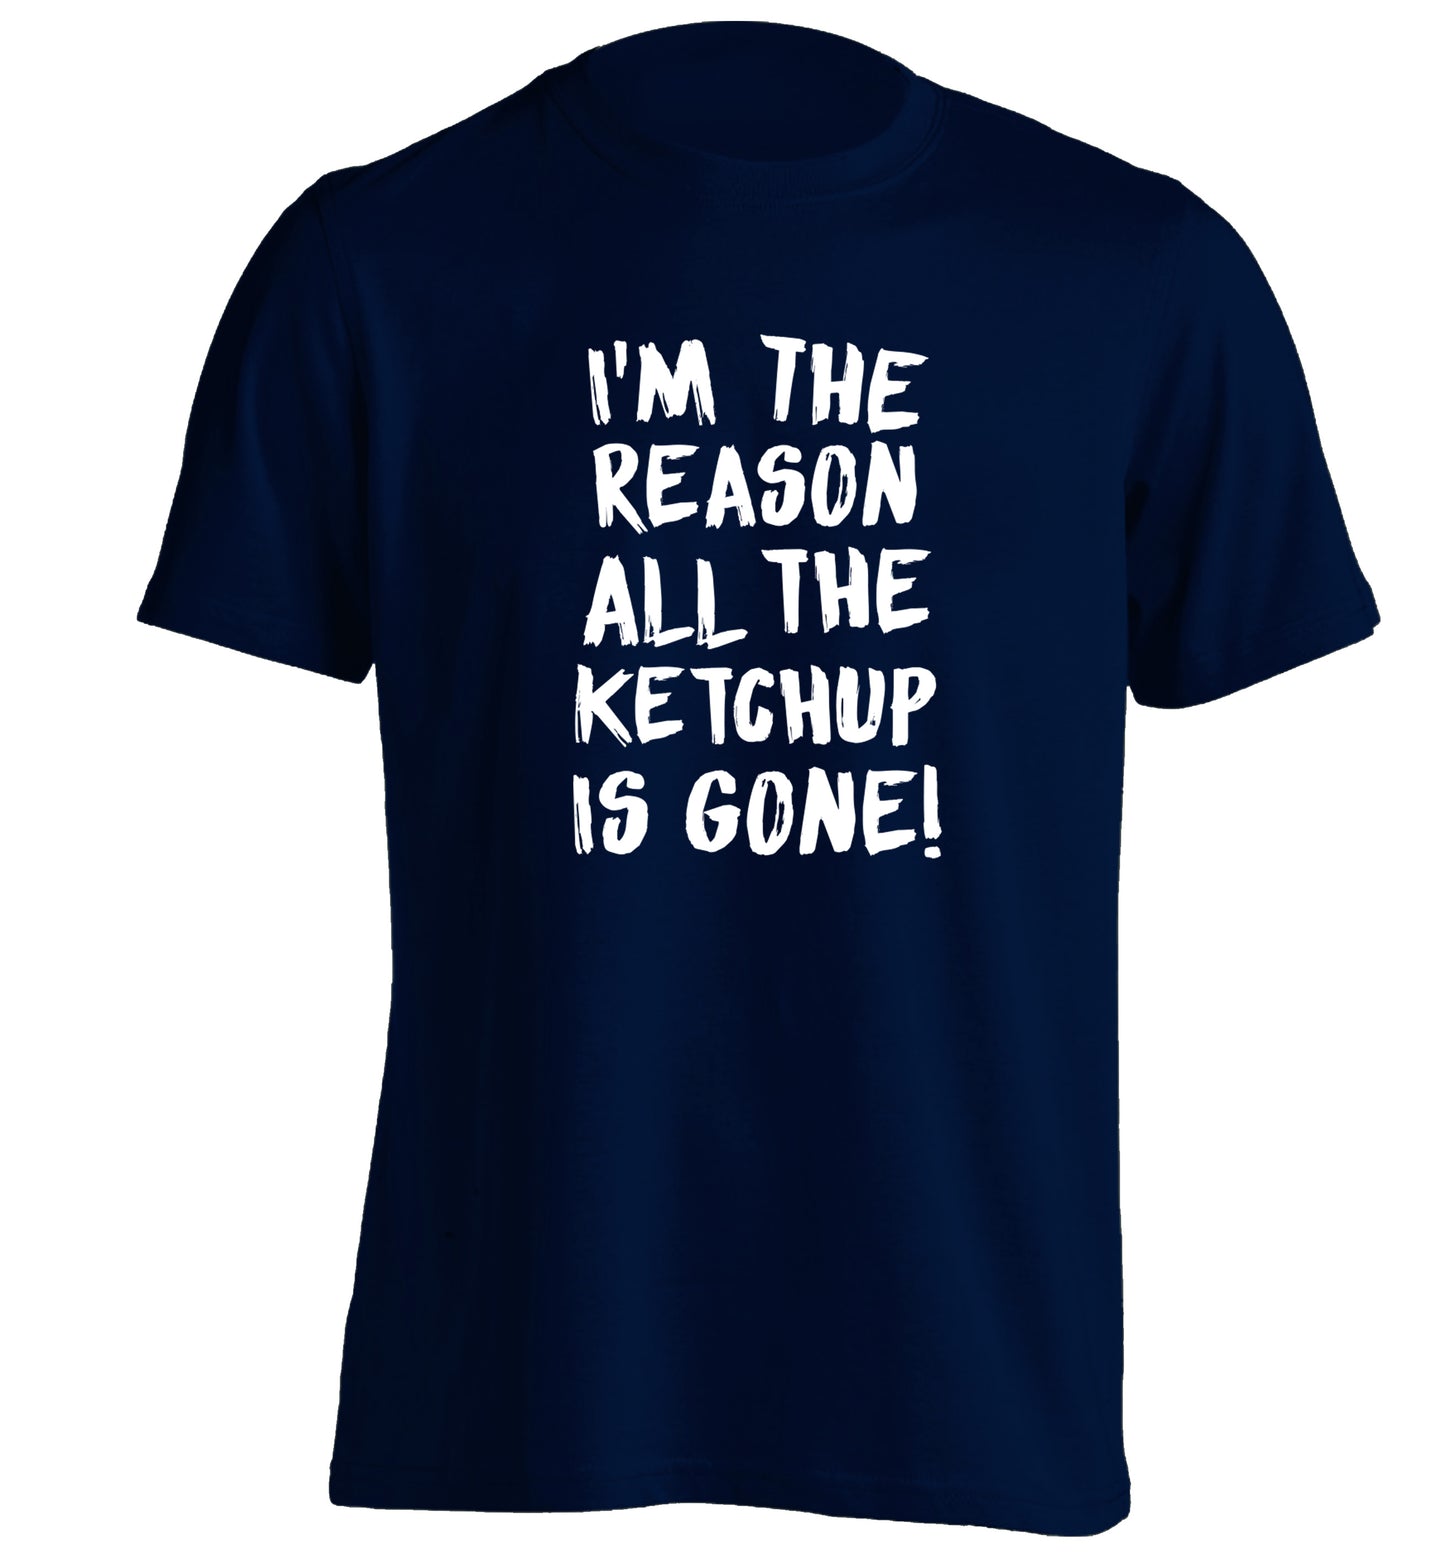 I'm the reason why all the ketchup is gone adults unisex navy Tshirt 2XL